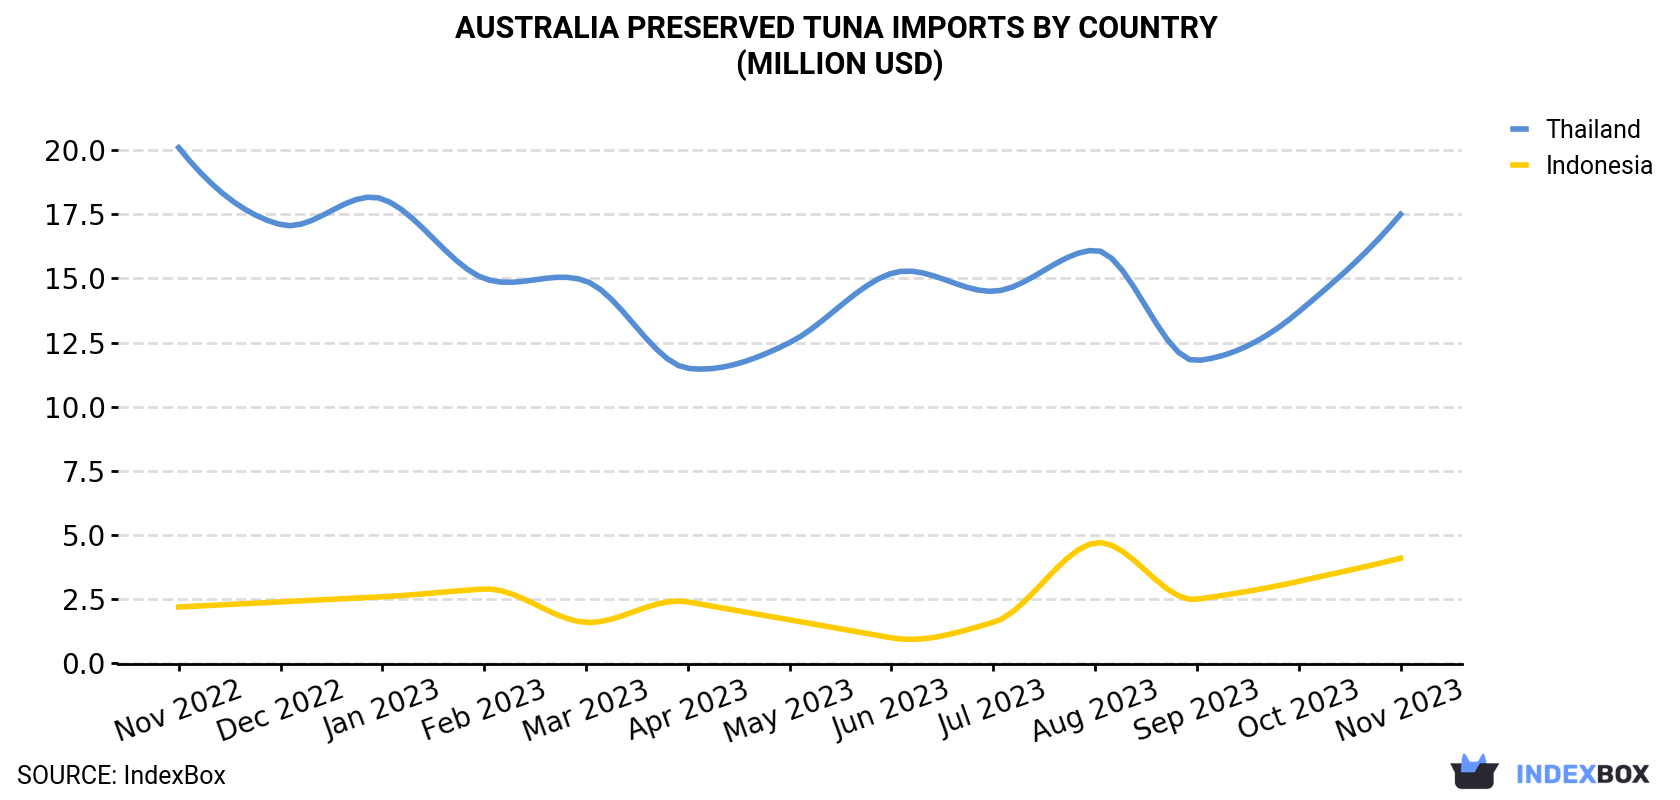 Australia Preserved Tuna Imports By Country (Million USD)